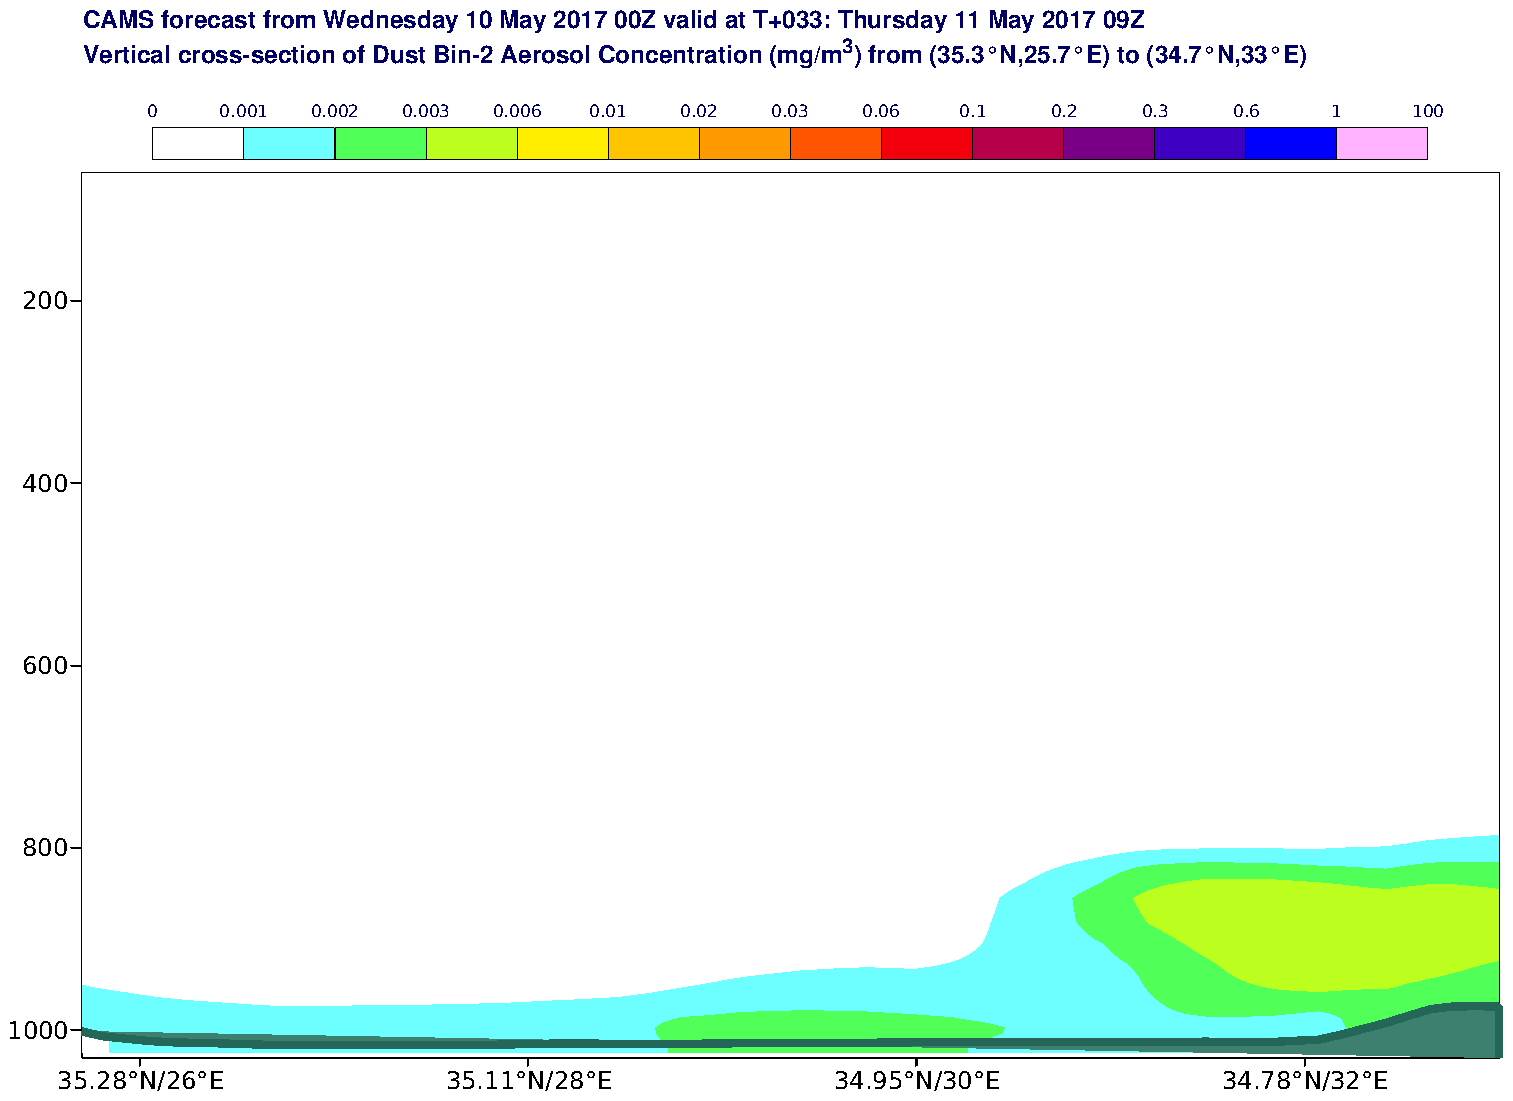 Vertical cross-section of Dust Bin-2 Aerosol Concentration (mg/m3) valid at T33 - 2017-05-11 09:00